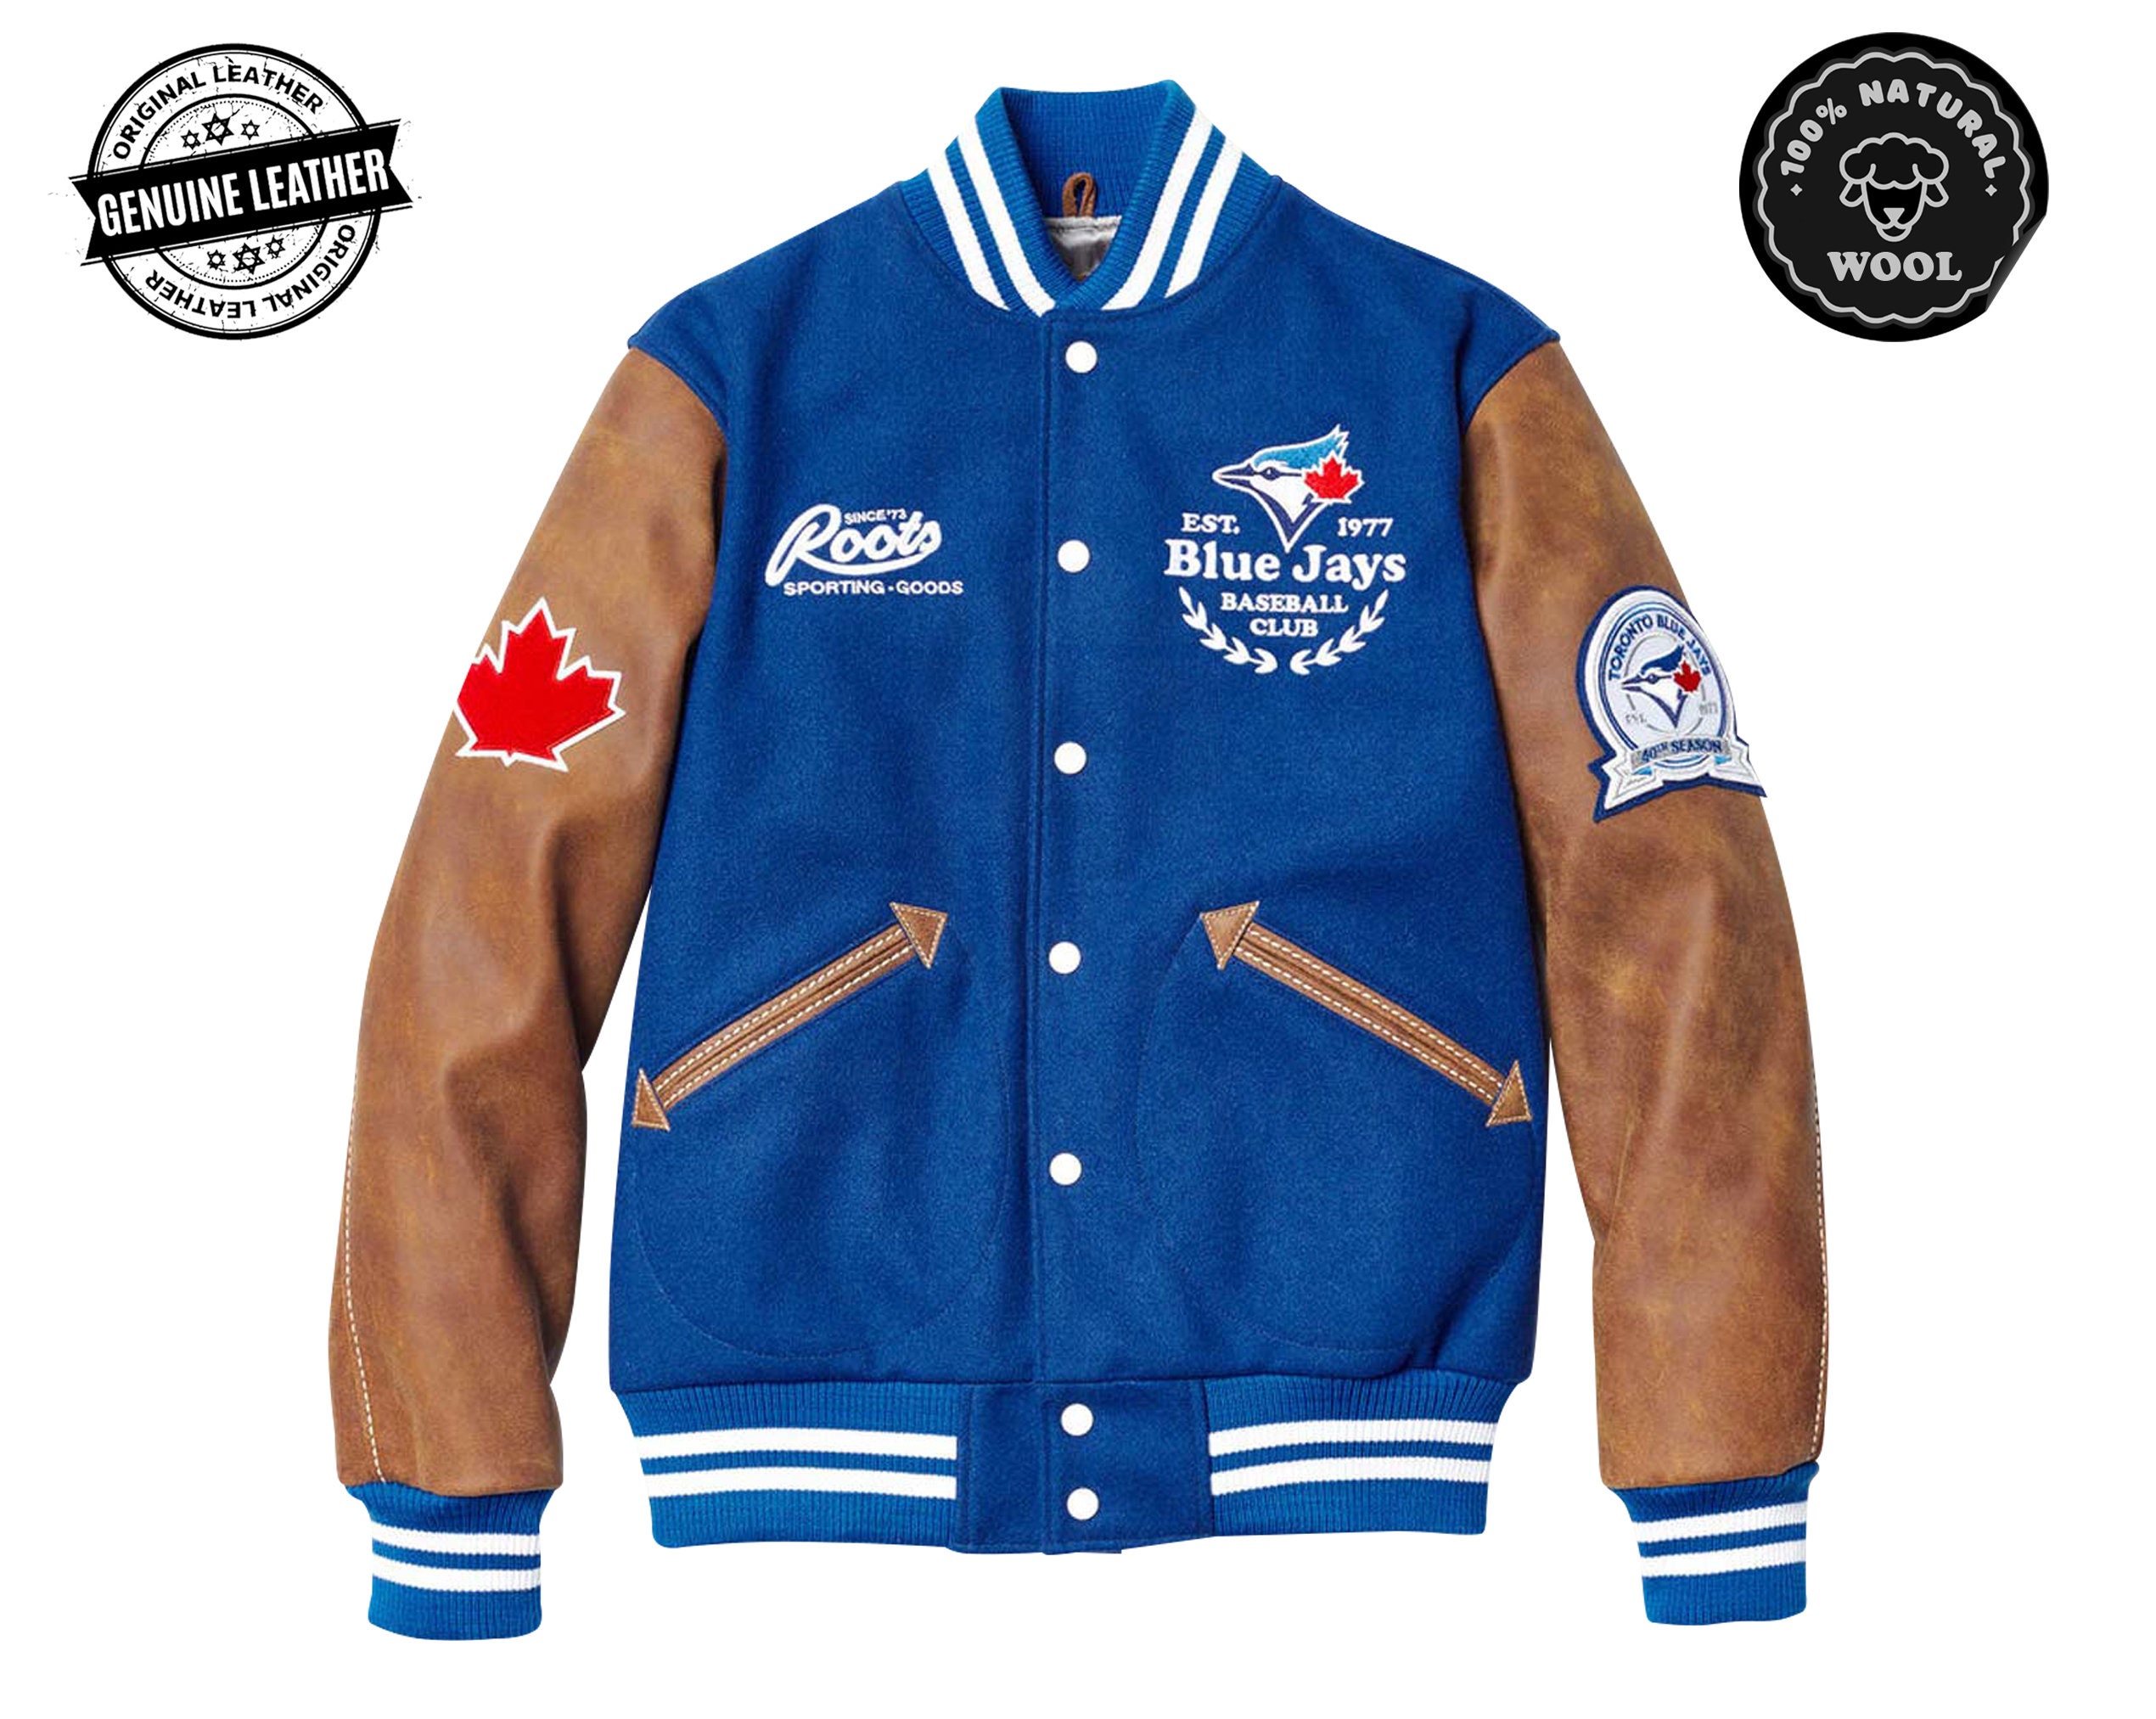 Royal Blue Butter Soft Baseball Leather Jacket with hood